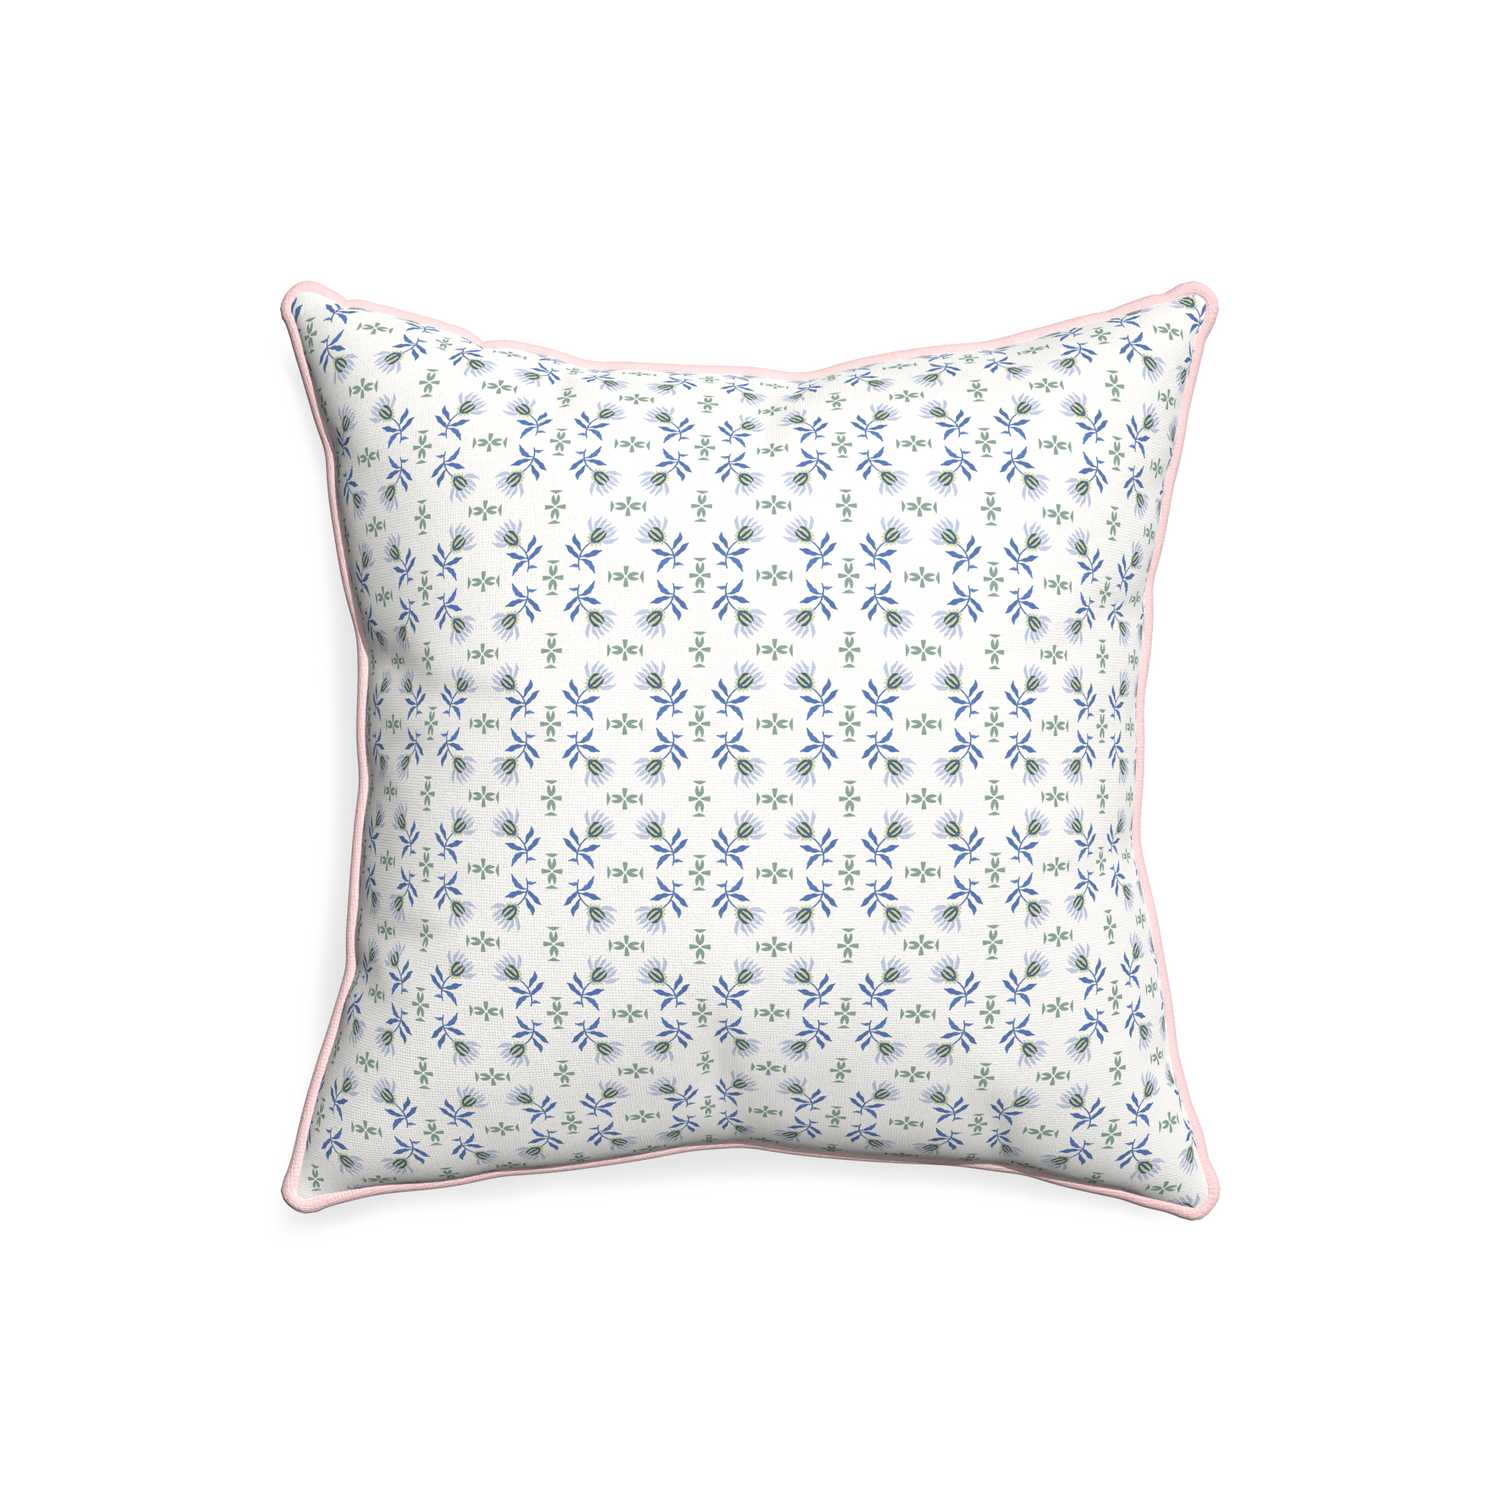 20-square lee custom pillow with petal piping on white background